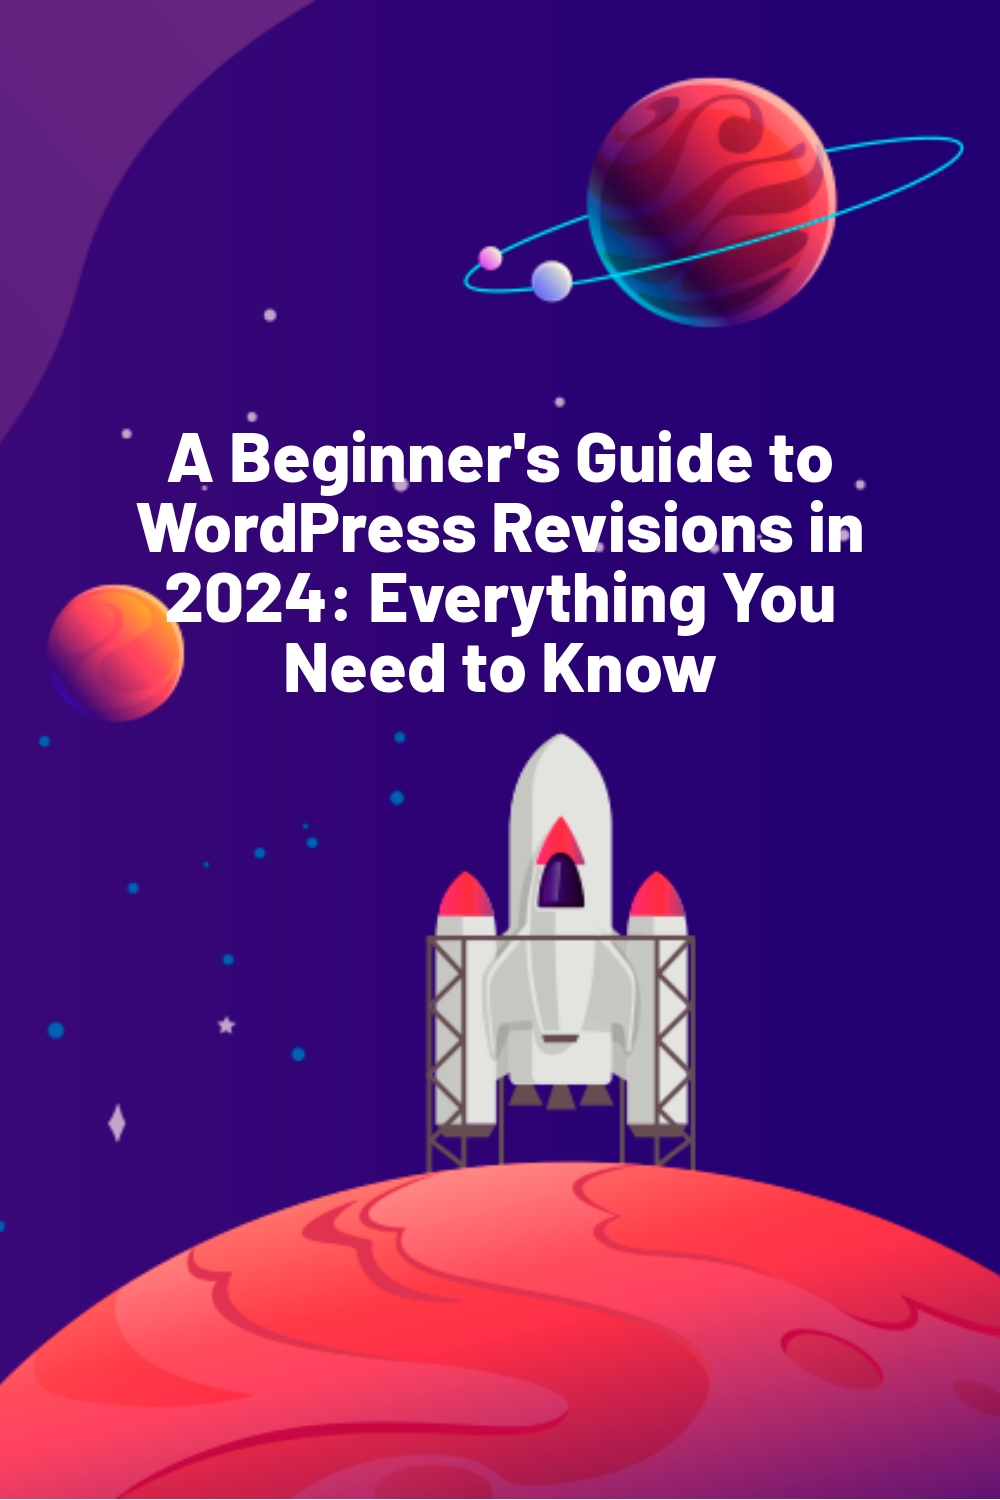 A Beginner’s Guide to WordPress Revisions in 2024: Everything You Need to Know